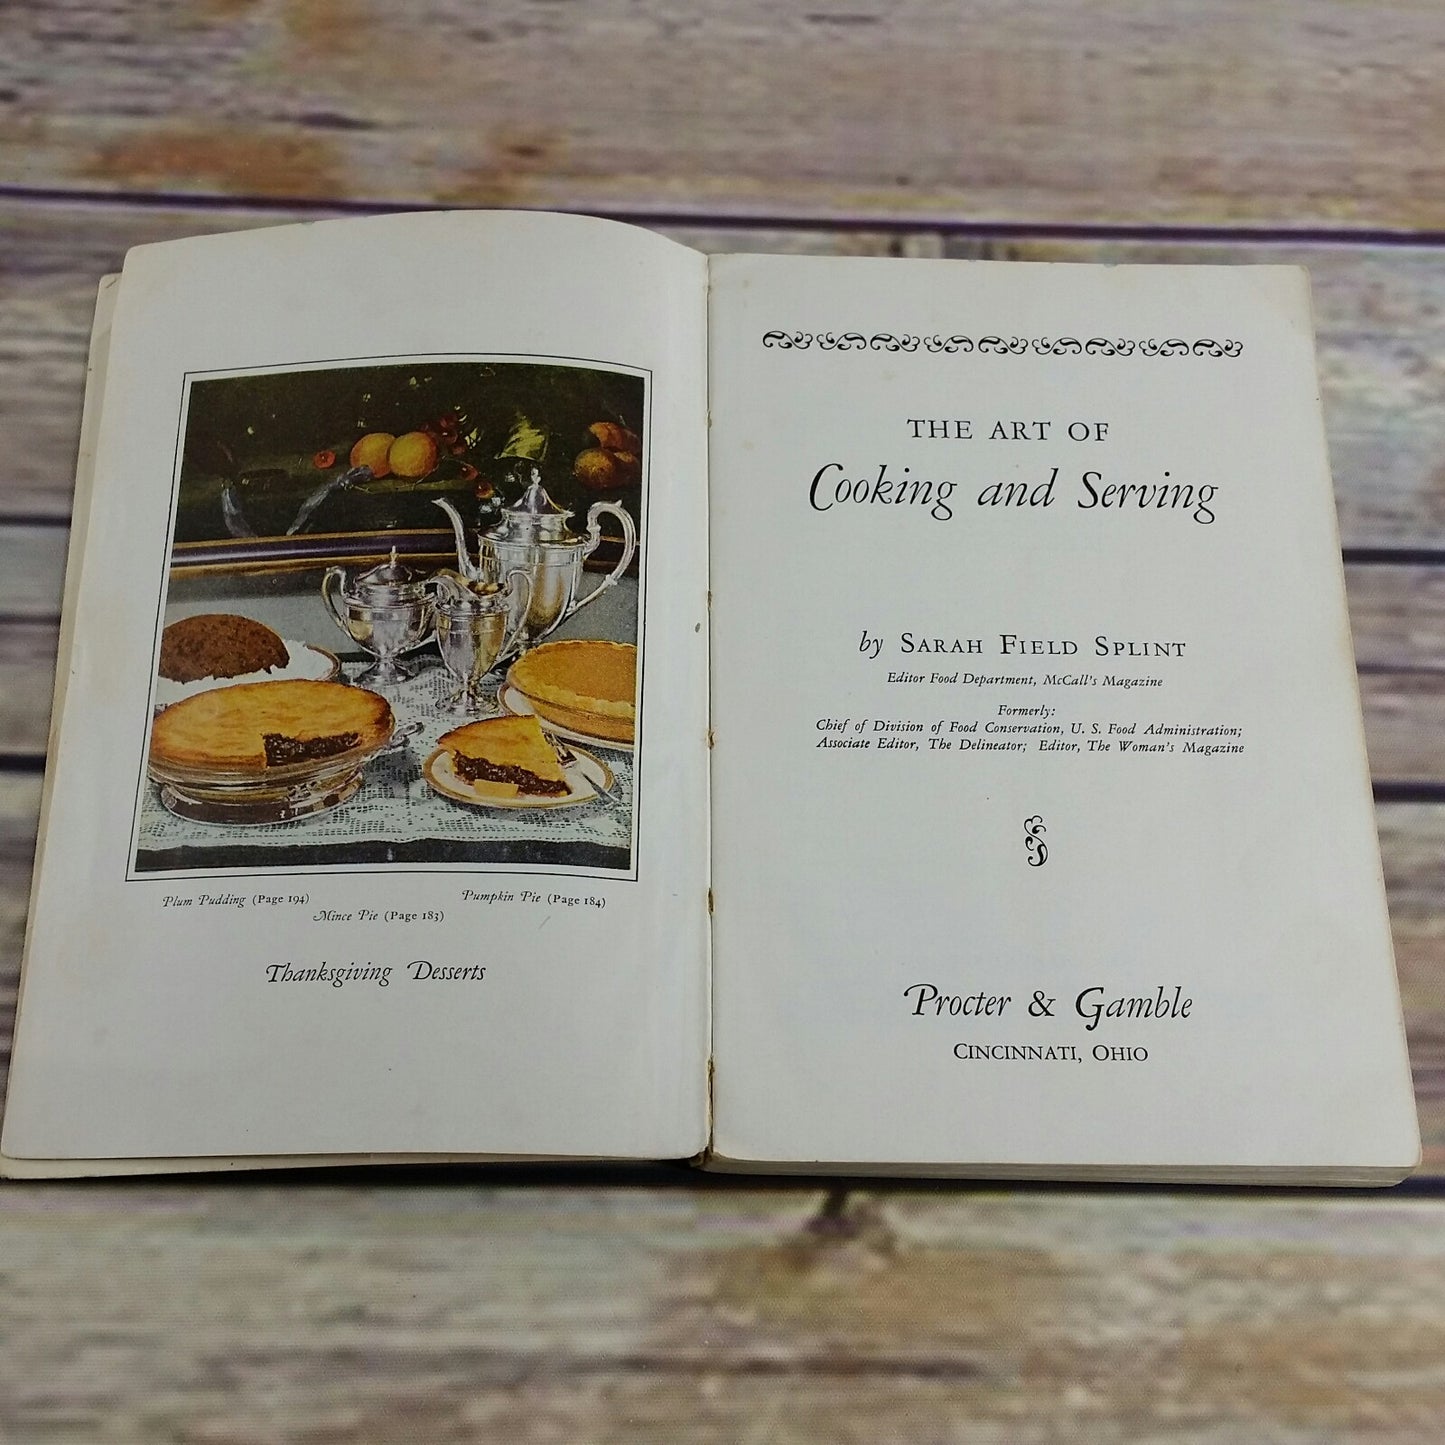 Vintage Cookbook The Art of Cooking and Serving Crisco Recipes 1934 Paperback Cook Book - At Grandma's Table